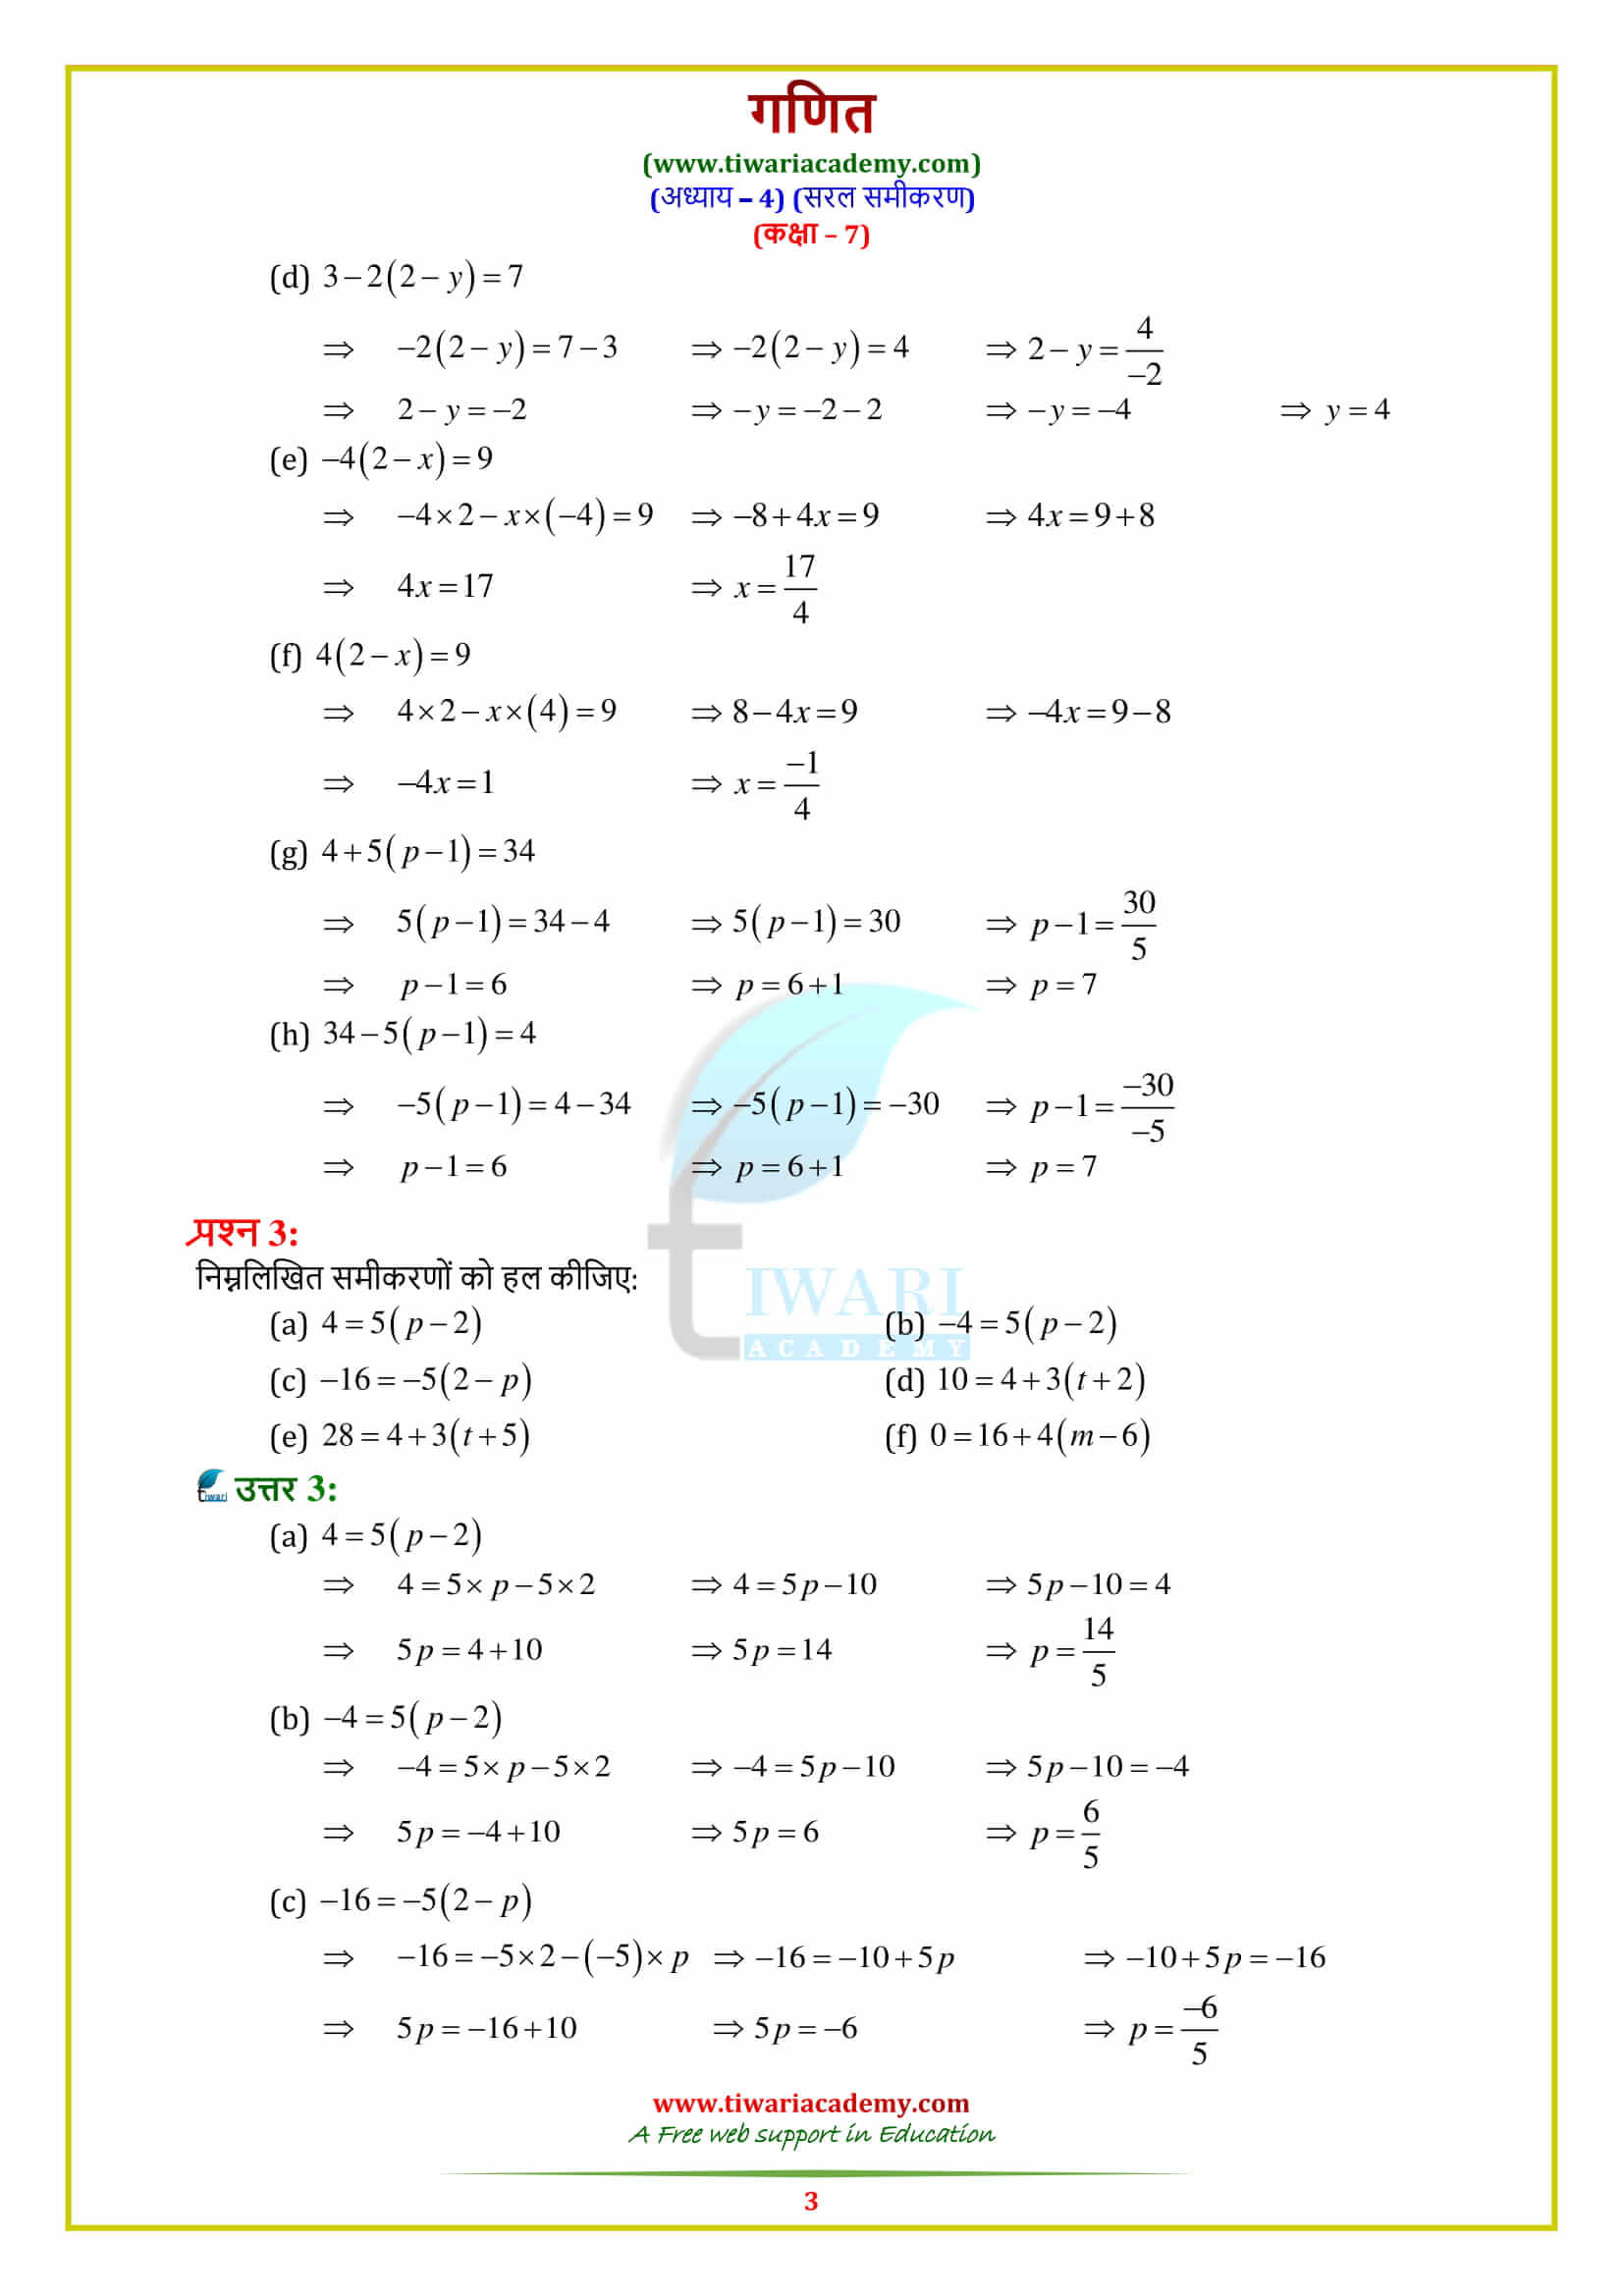 7 Maths Exercise 4.3 Solutions in hindi